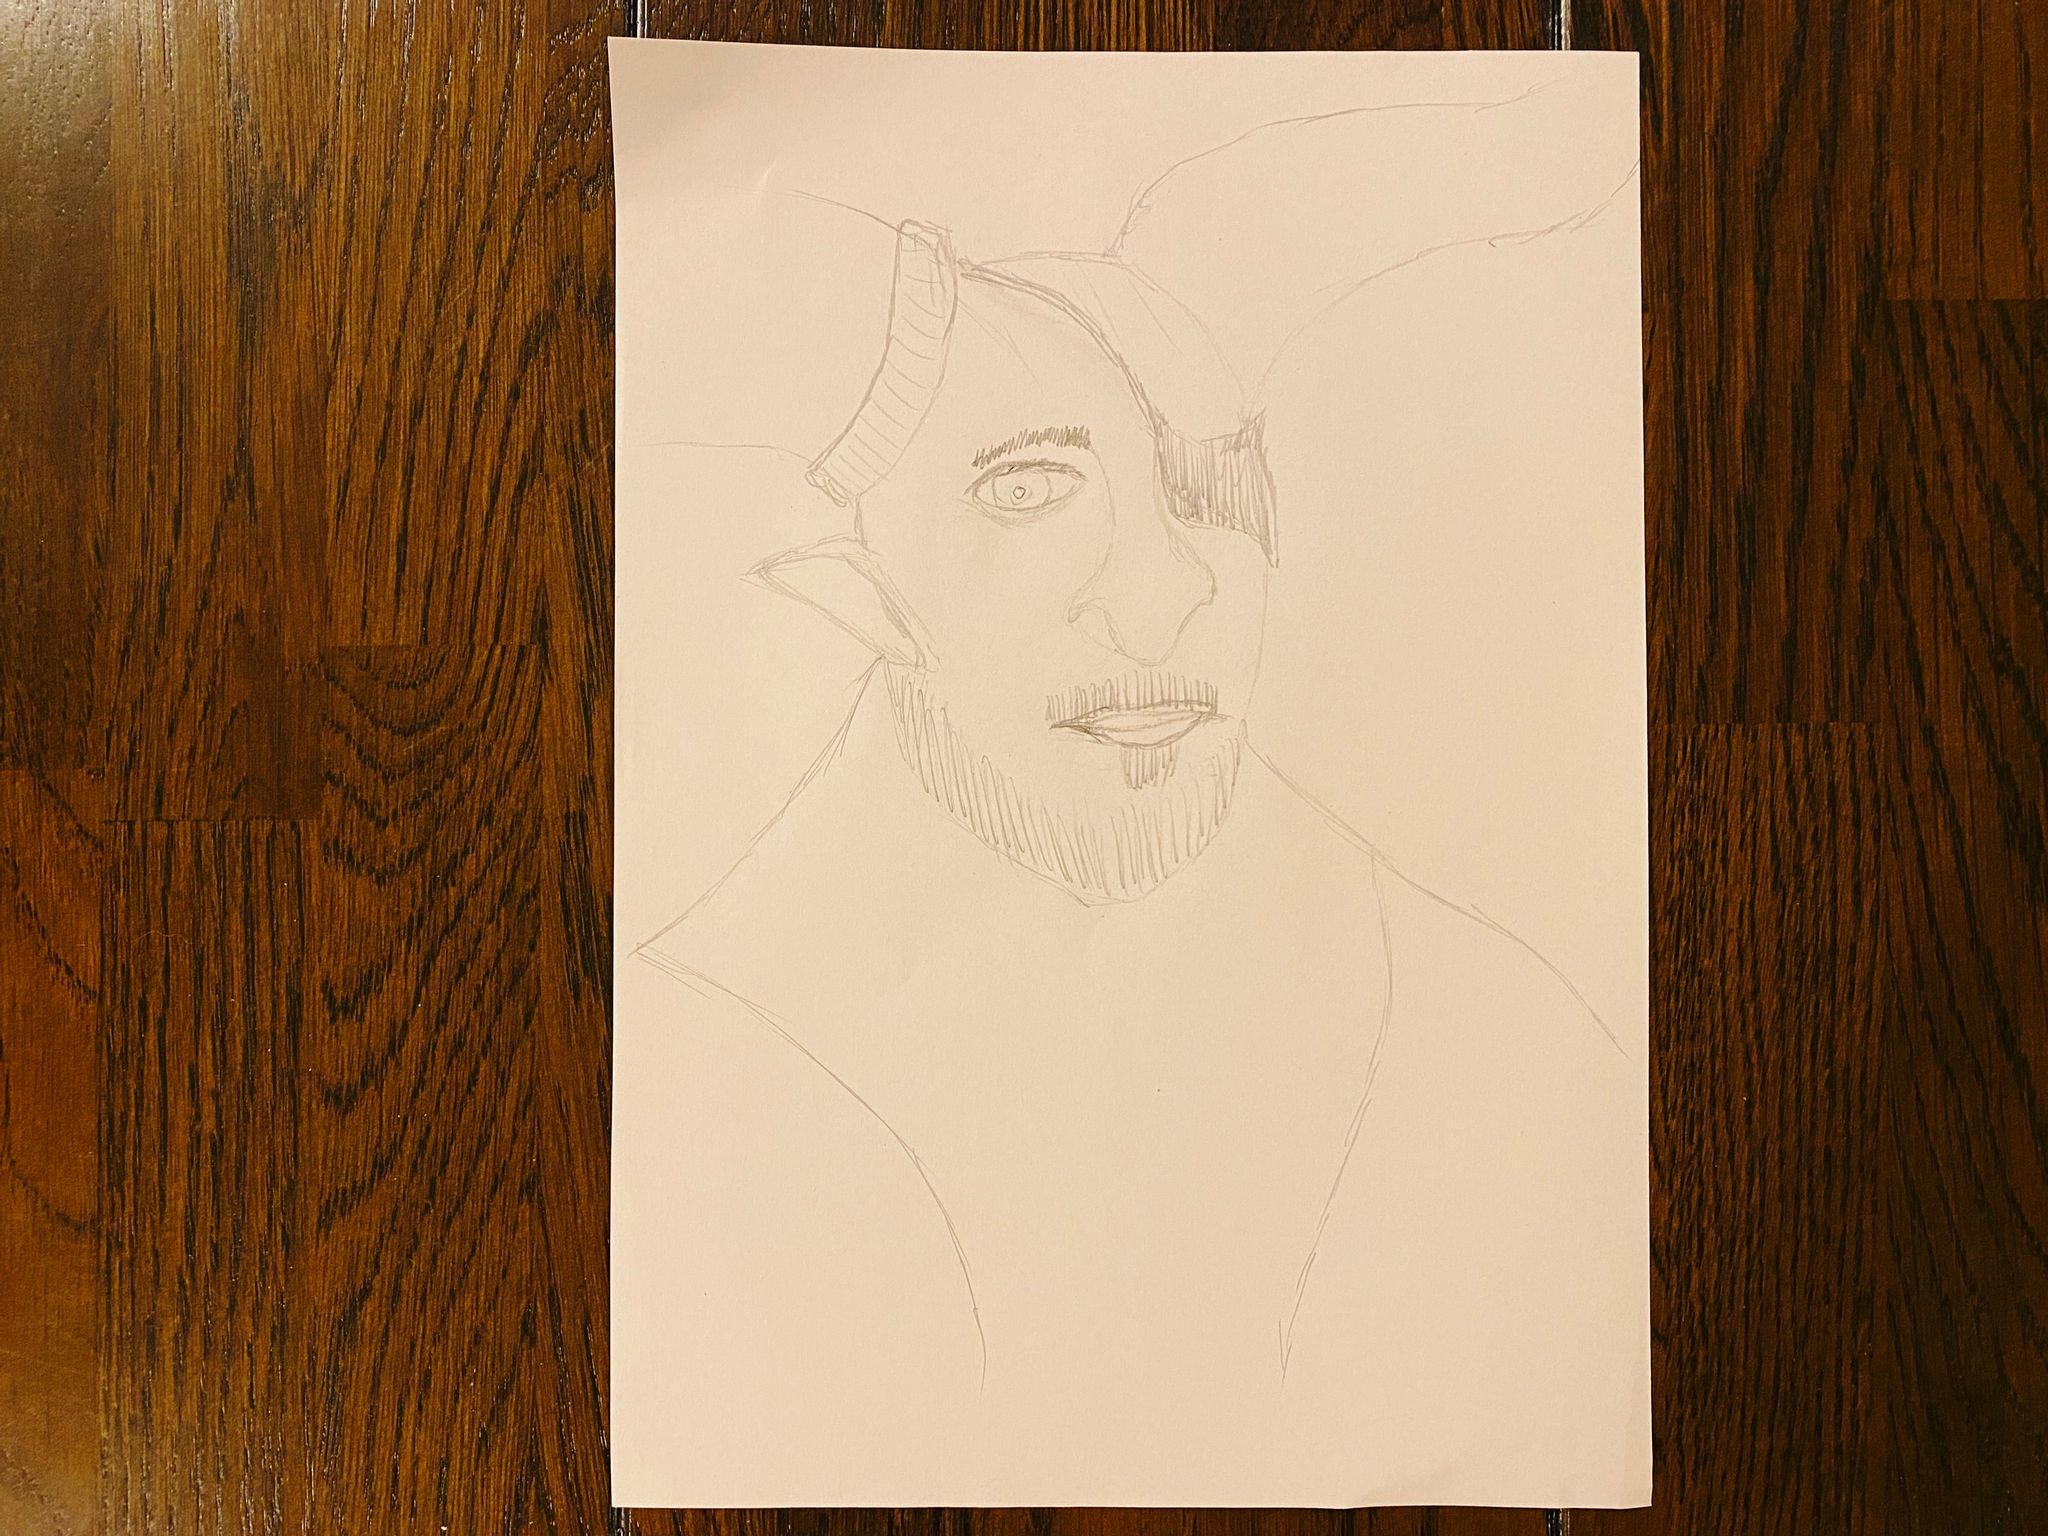 A single pencil drawing just by me of Iron Bull, who is a large bearded male character with big horns, an eyepatch, and a large neck and shoulders. There's no shading, it's just a sketch, but he's actually pretty recognisably Iron Bull I reckon.